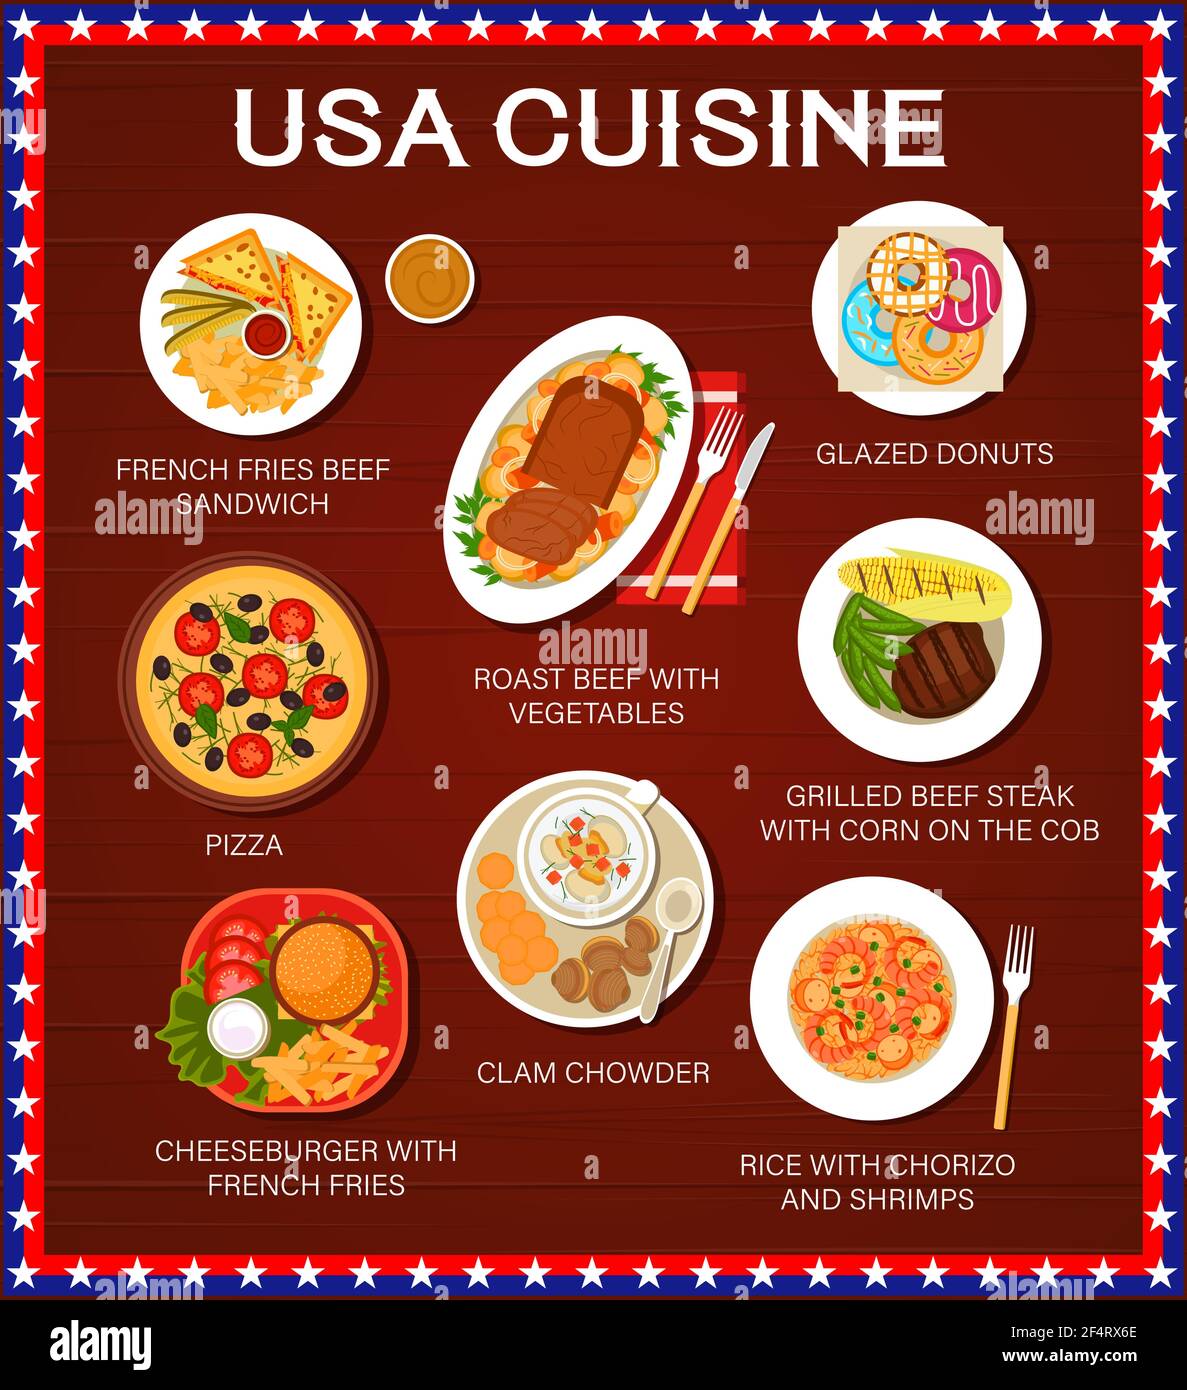 https://c8.alamy.com/comp/2F4RX6E/usa-cuisine-food-menu-american-dishes-and-meals-traditional-restaurant-lunch-and-dinner-vector-poster-us-american-food-menu-of-sandwich-with-french-2F4RX6E.jpg